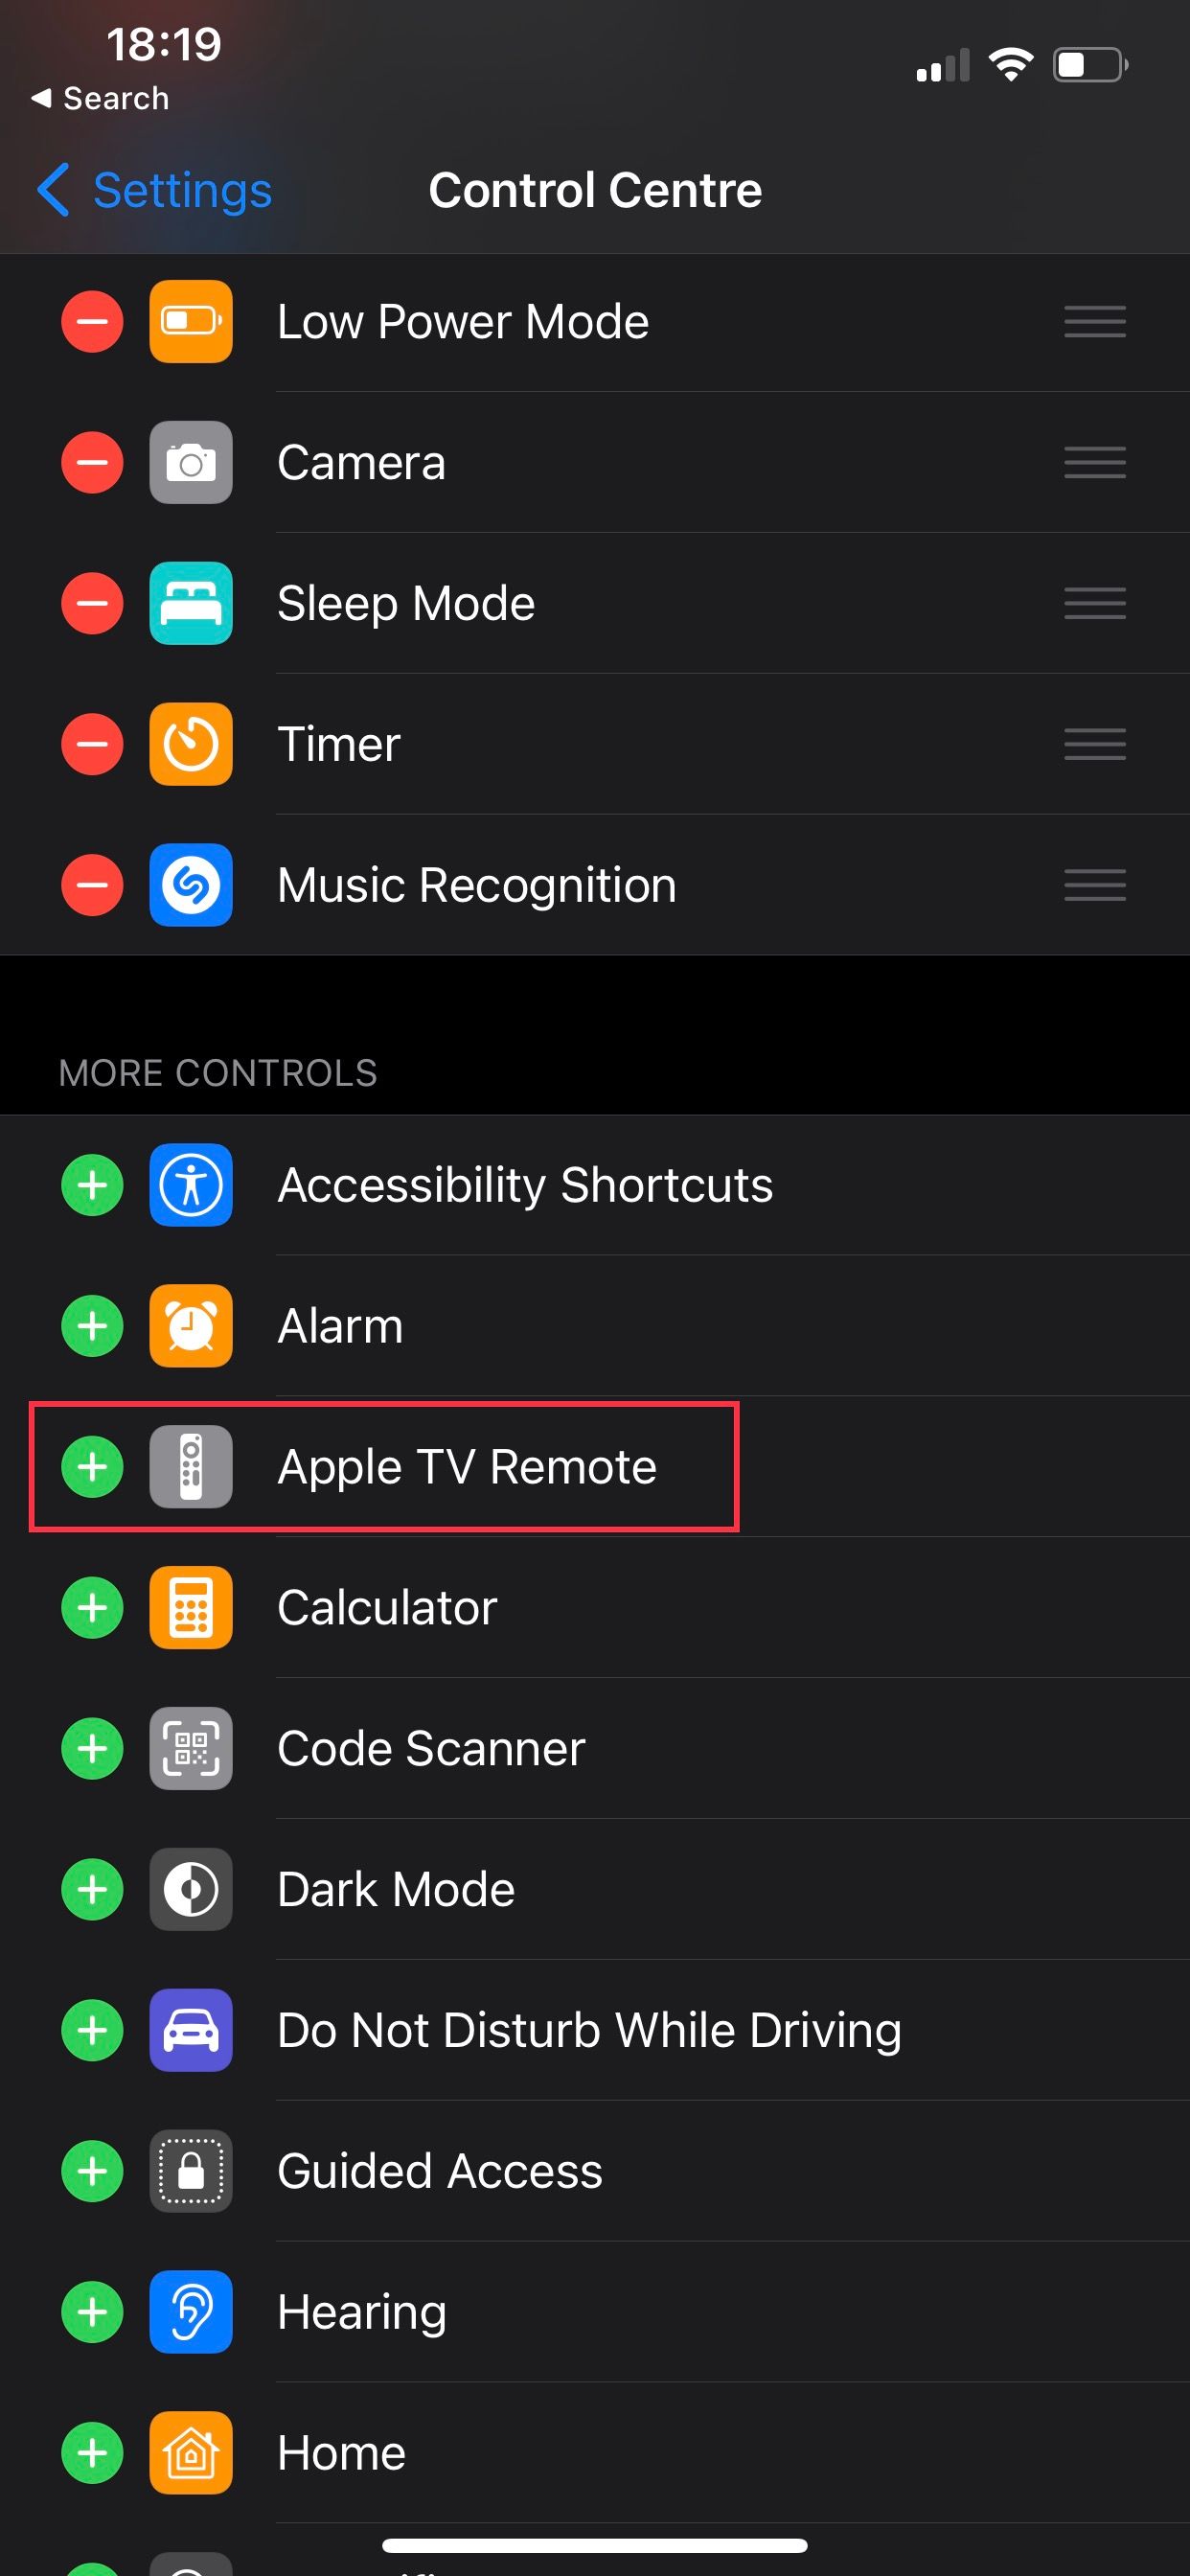 Adding the Apple TV remote app to the Control Center on iPhone.